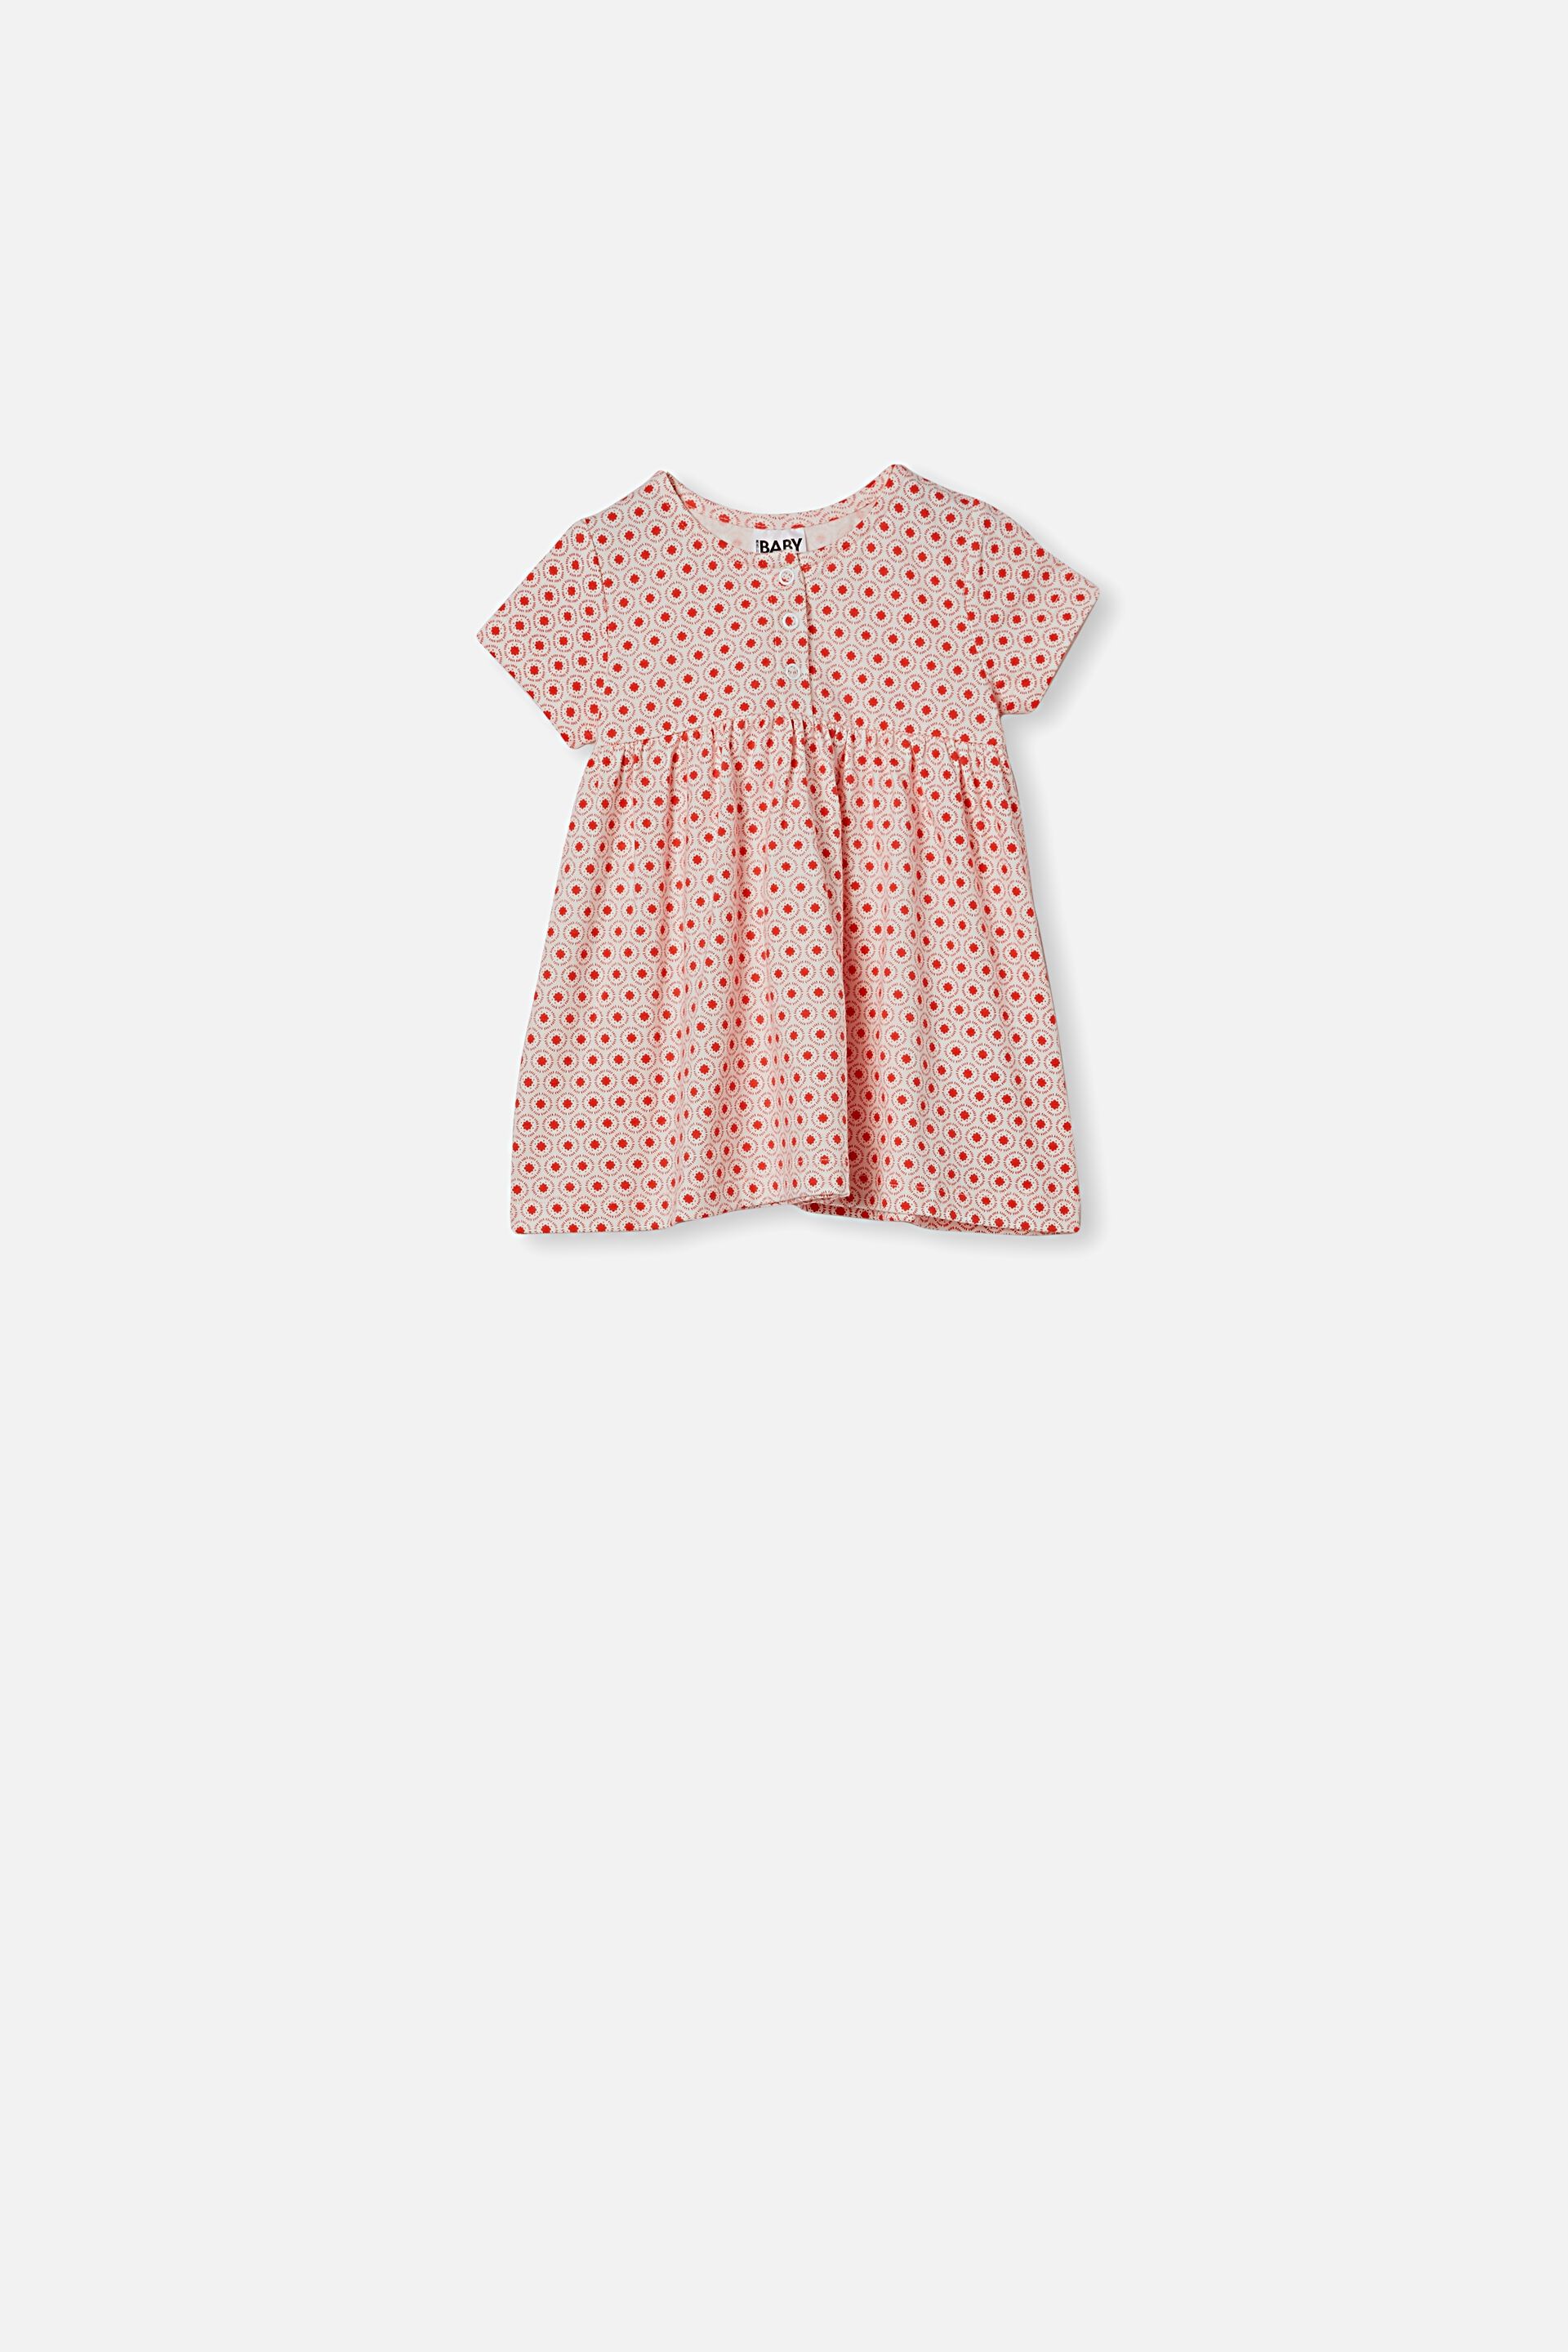 Milly Short Sleeve Dress | Baby Clothes 